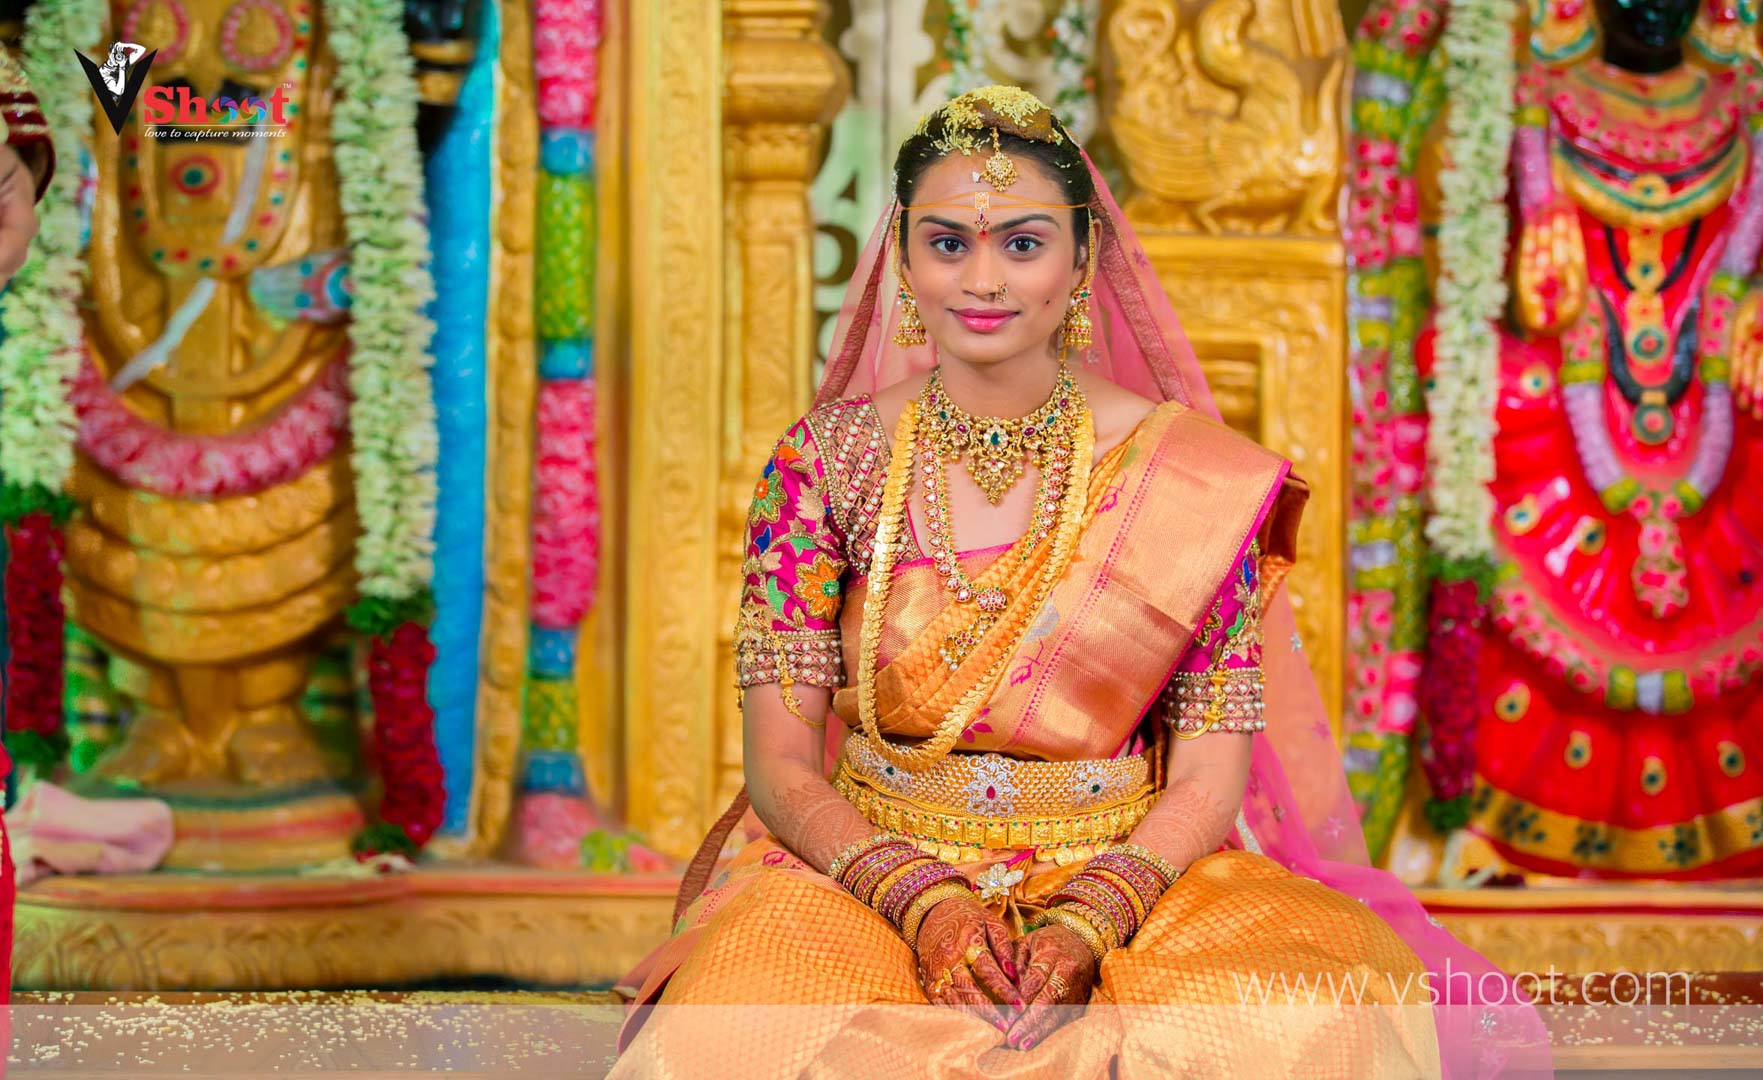 A guide to the perfect South Indian Bridal look